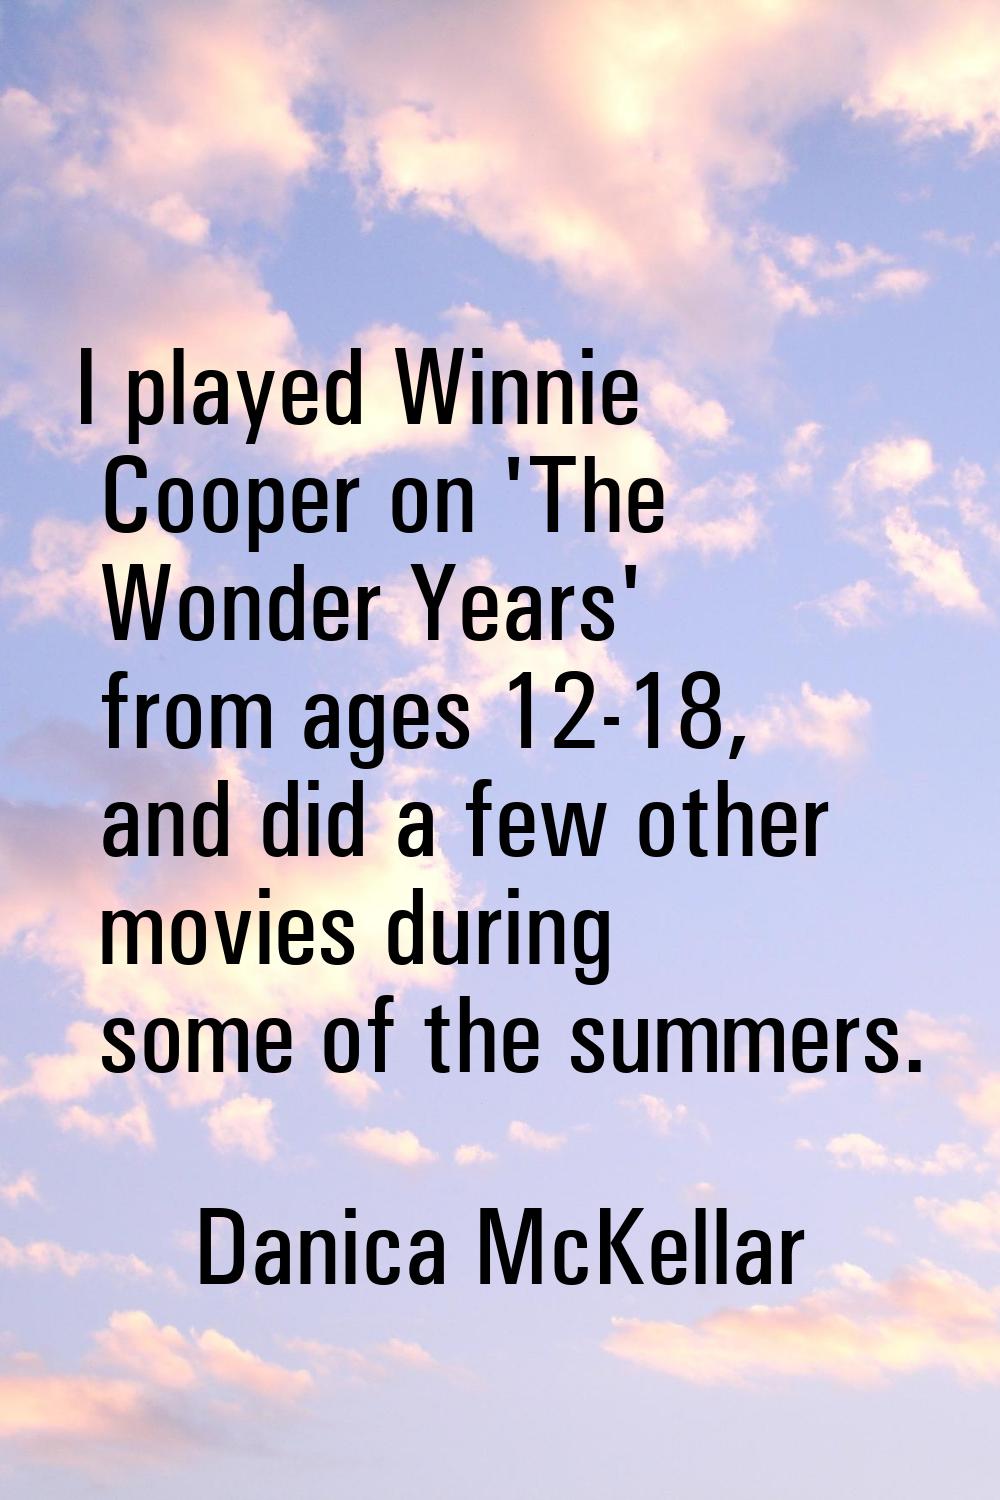 I played Winnie Cooper on 'The Wonder Years' from ages 12-18, and did a few other movies during som